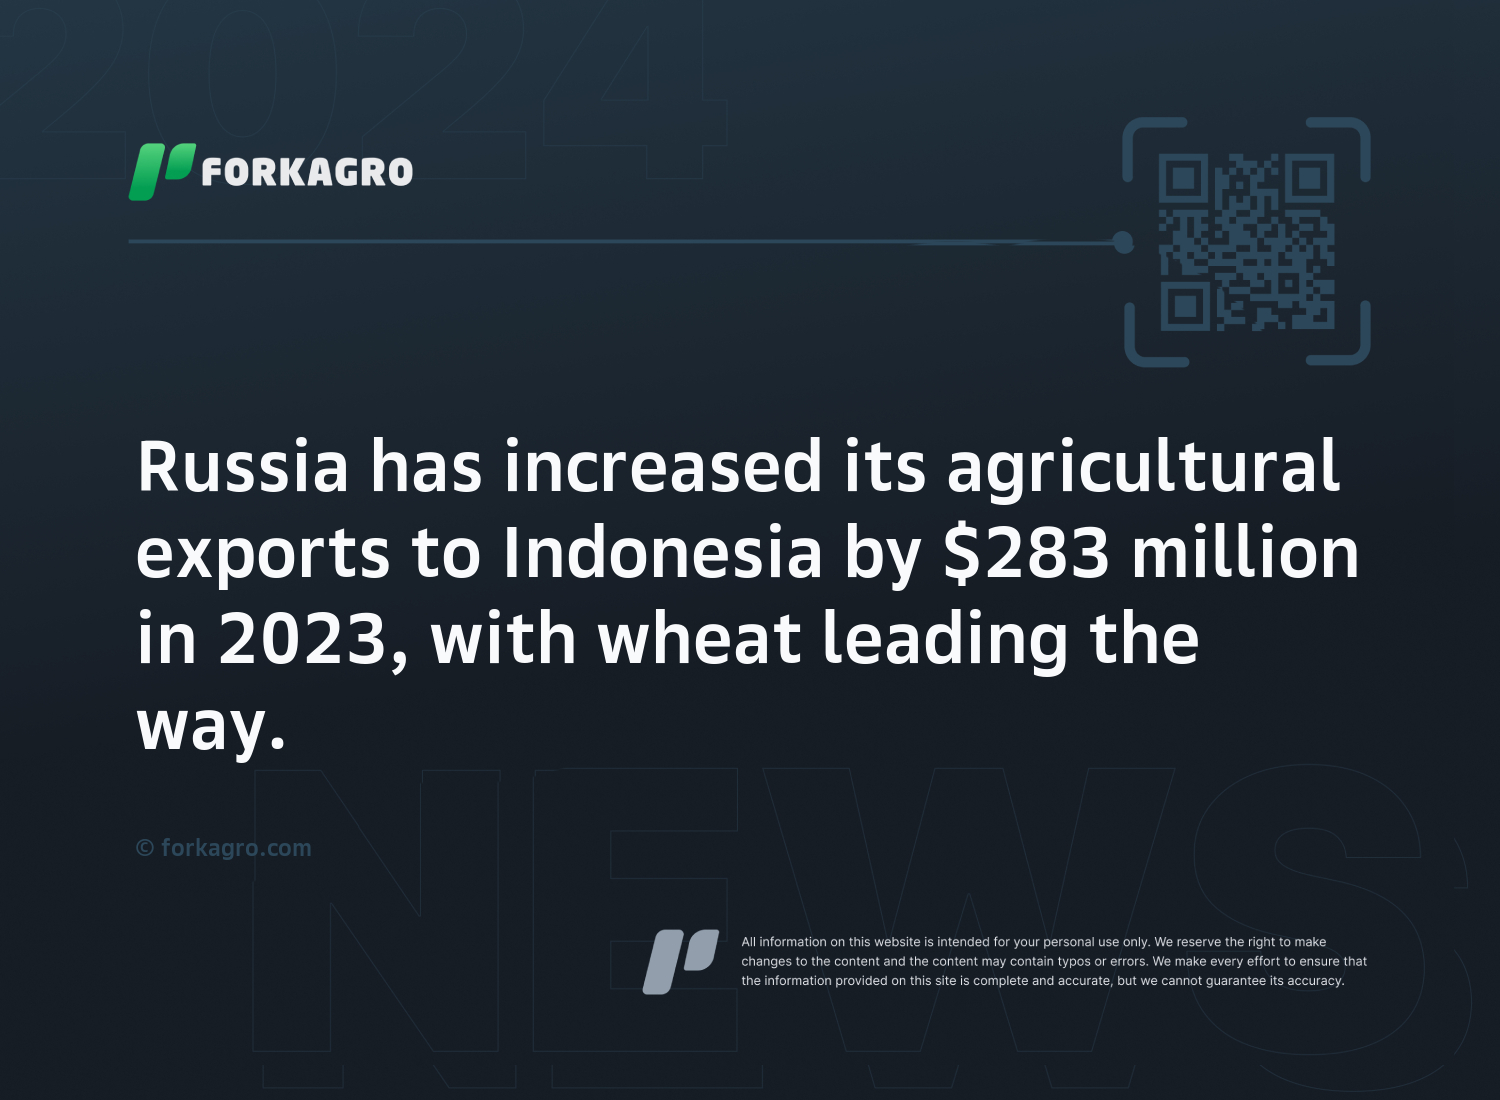 Russia has increased its agricultural exports to Indonesia by $283 million in 2023, with wheat leading the way.